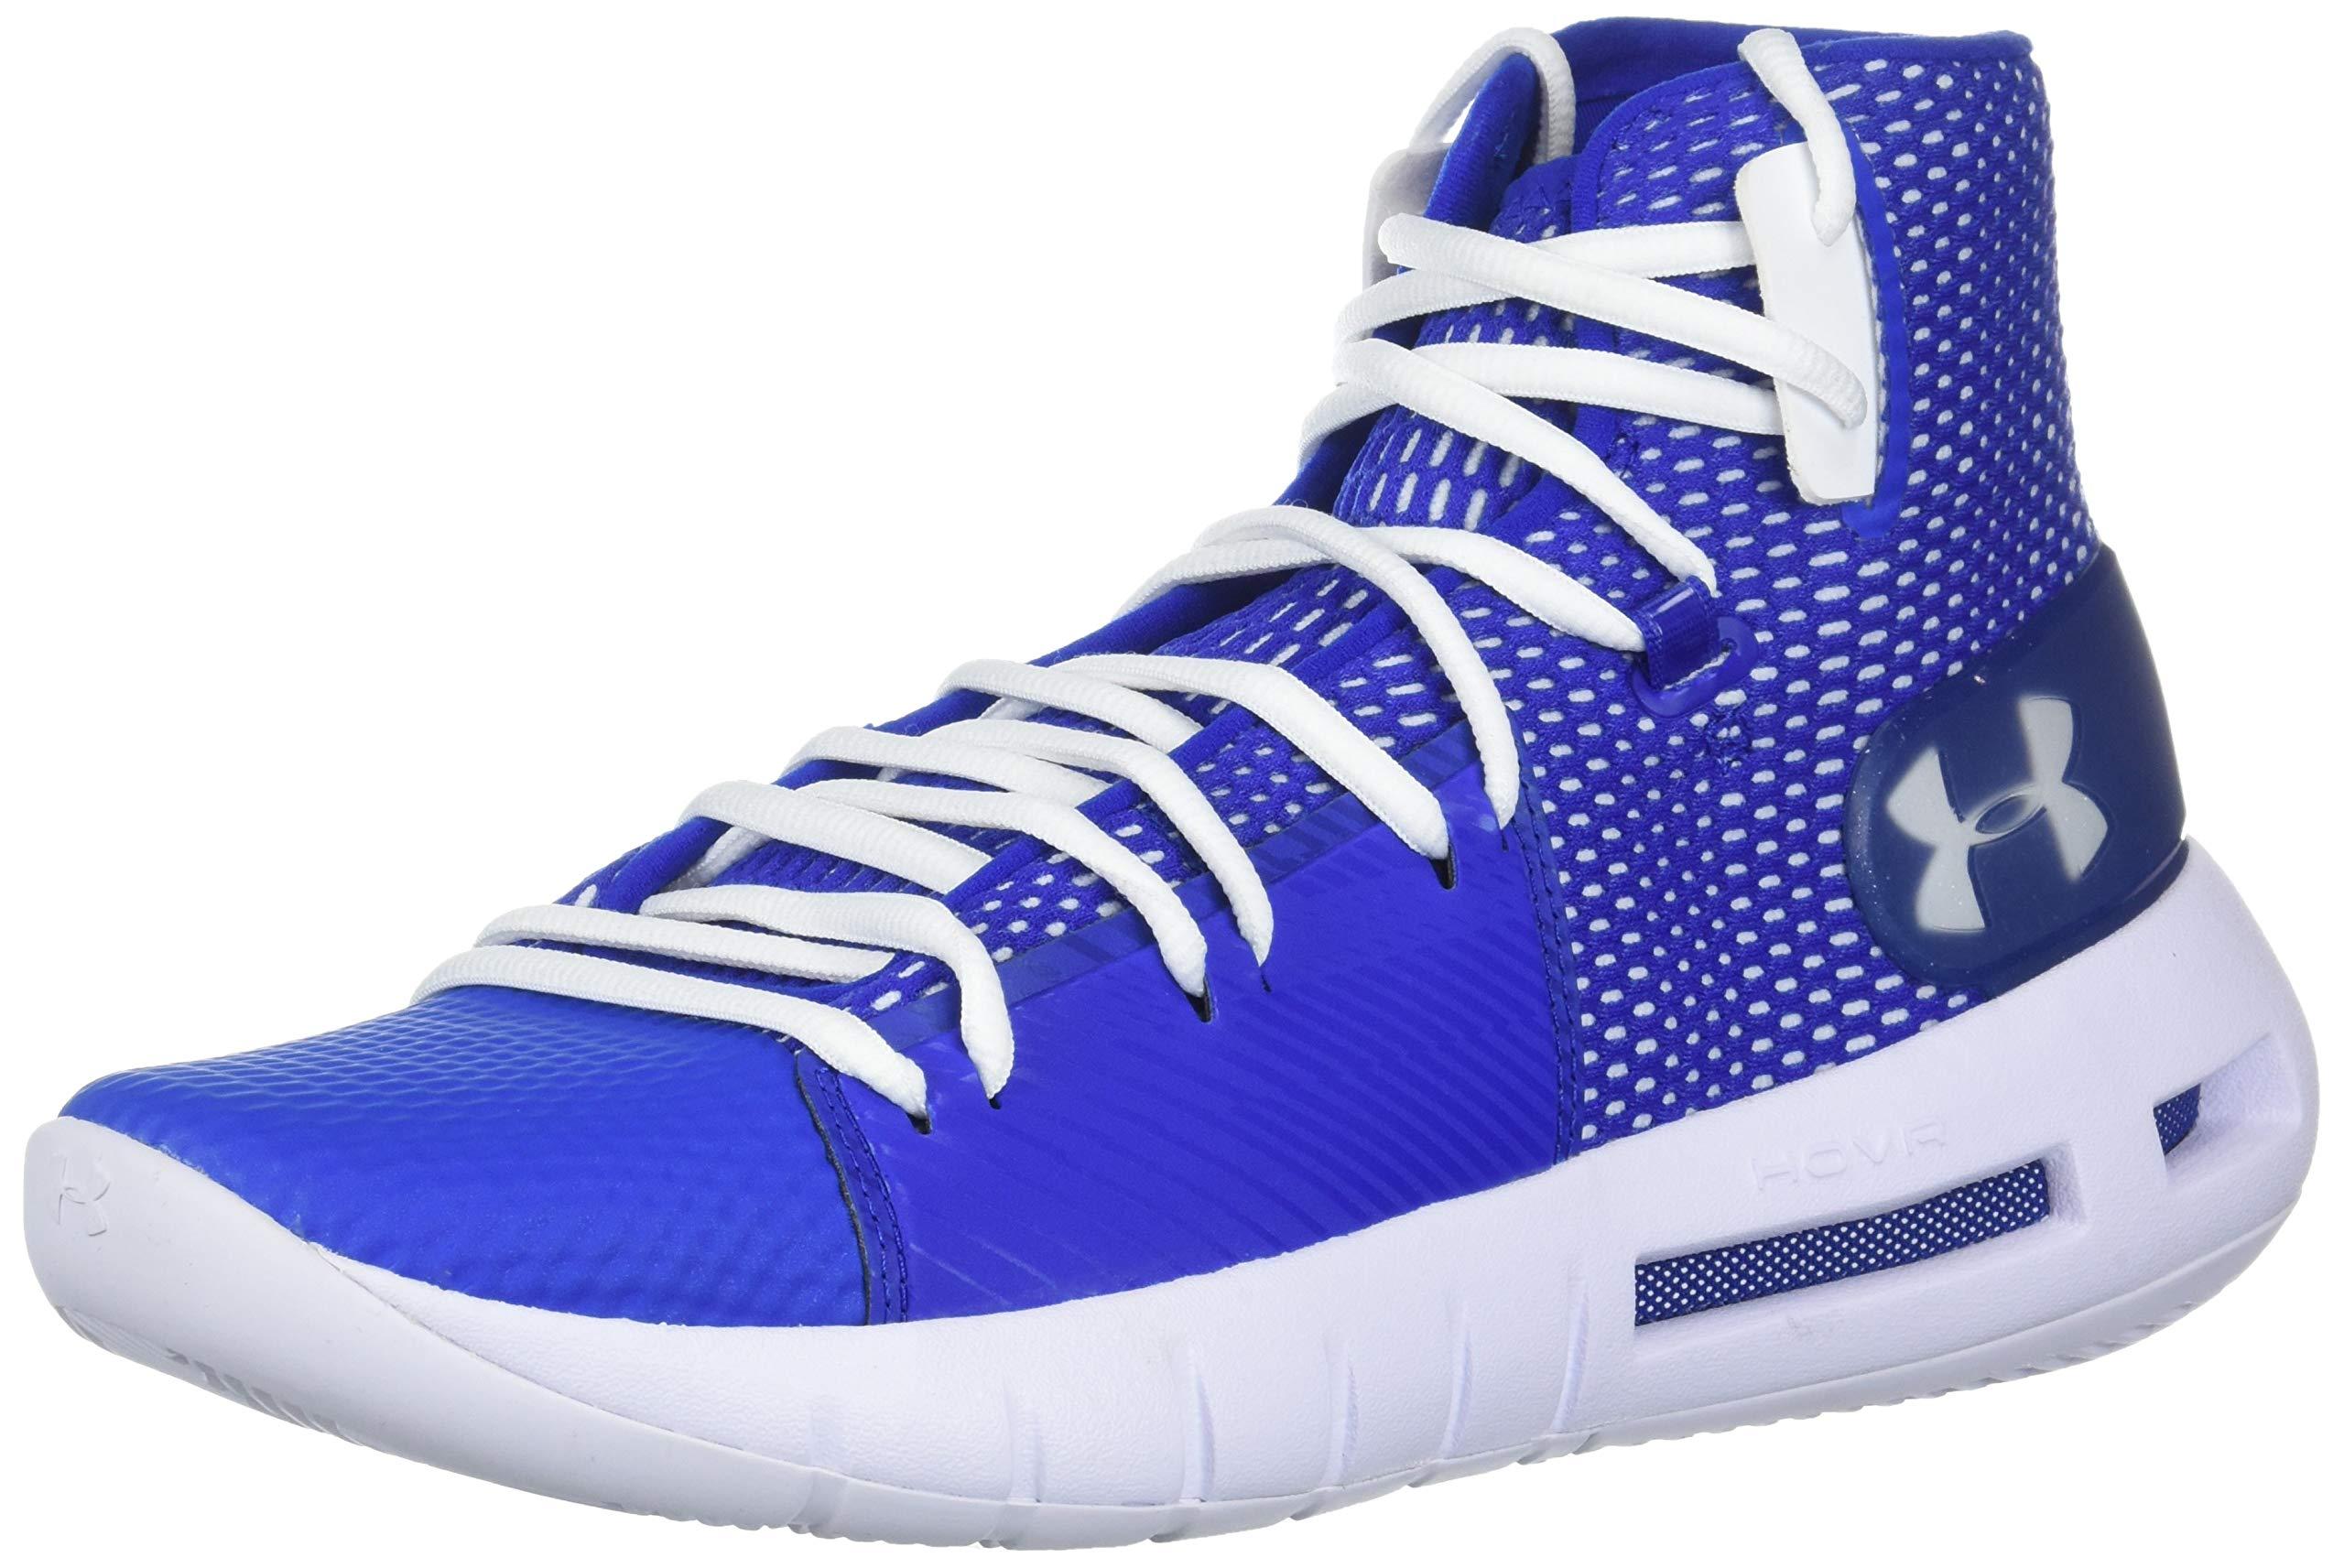 Under Armour Drive 5 Basketball Shoe in 